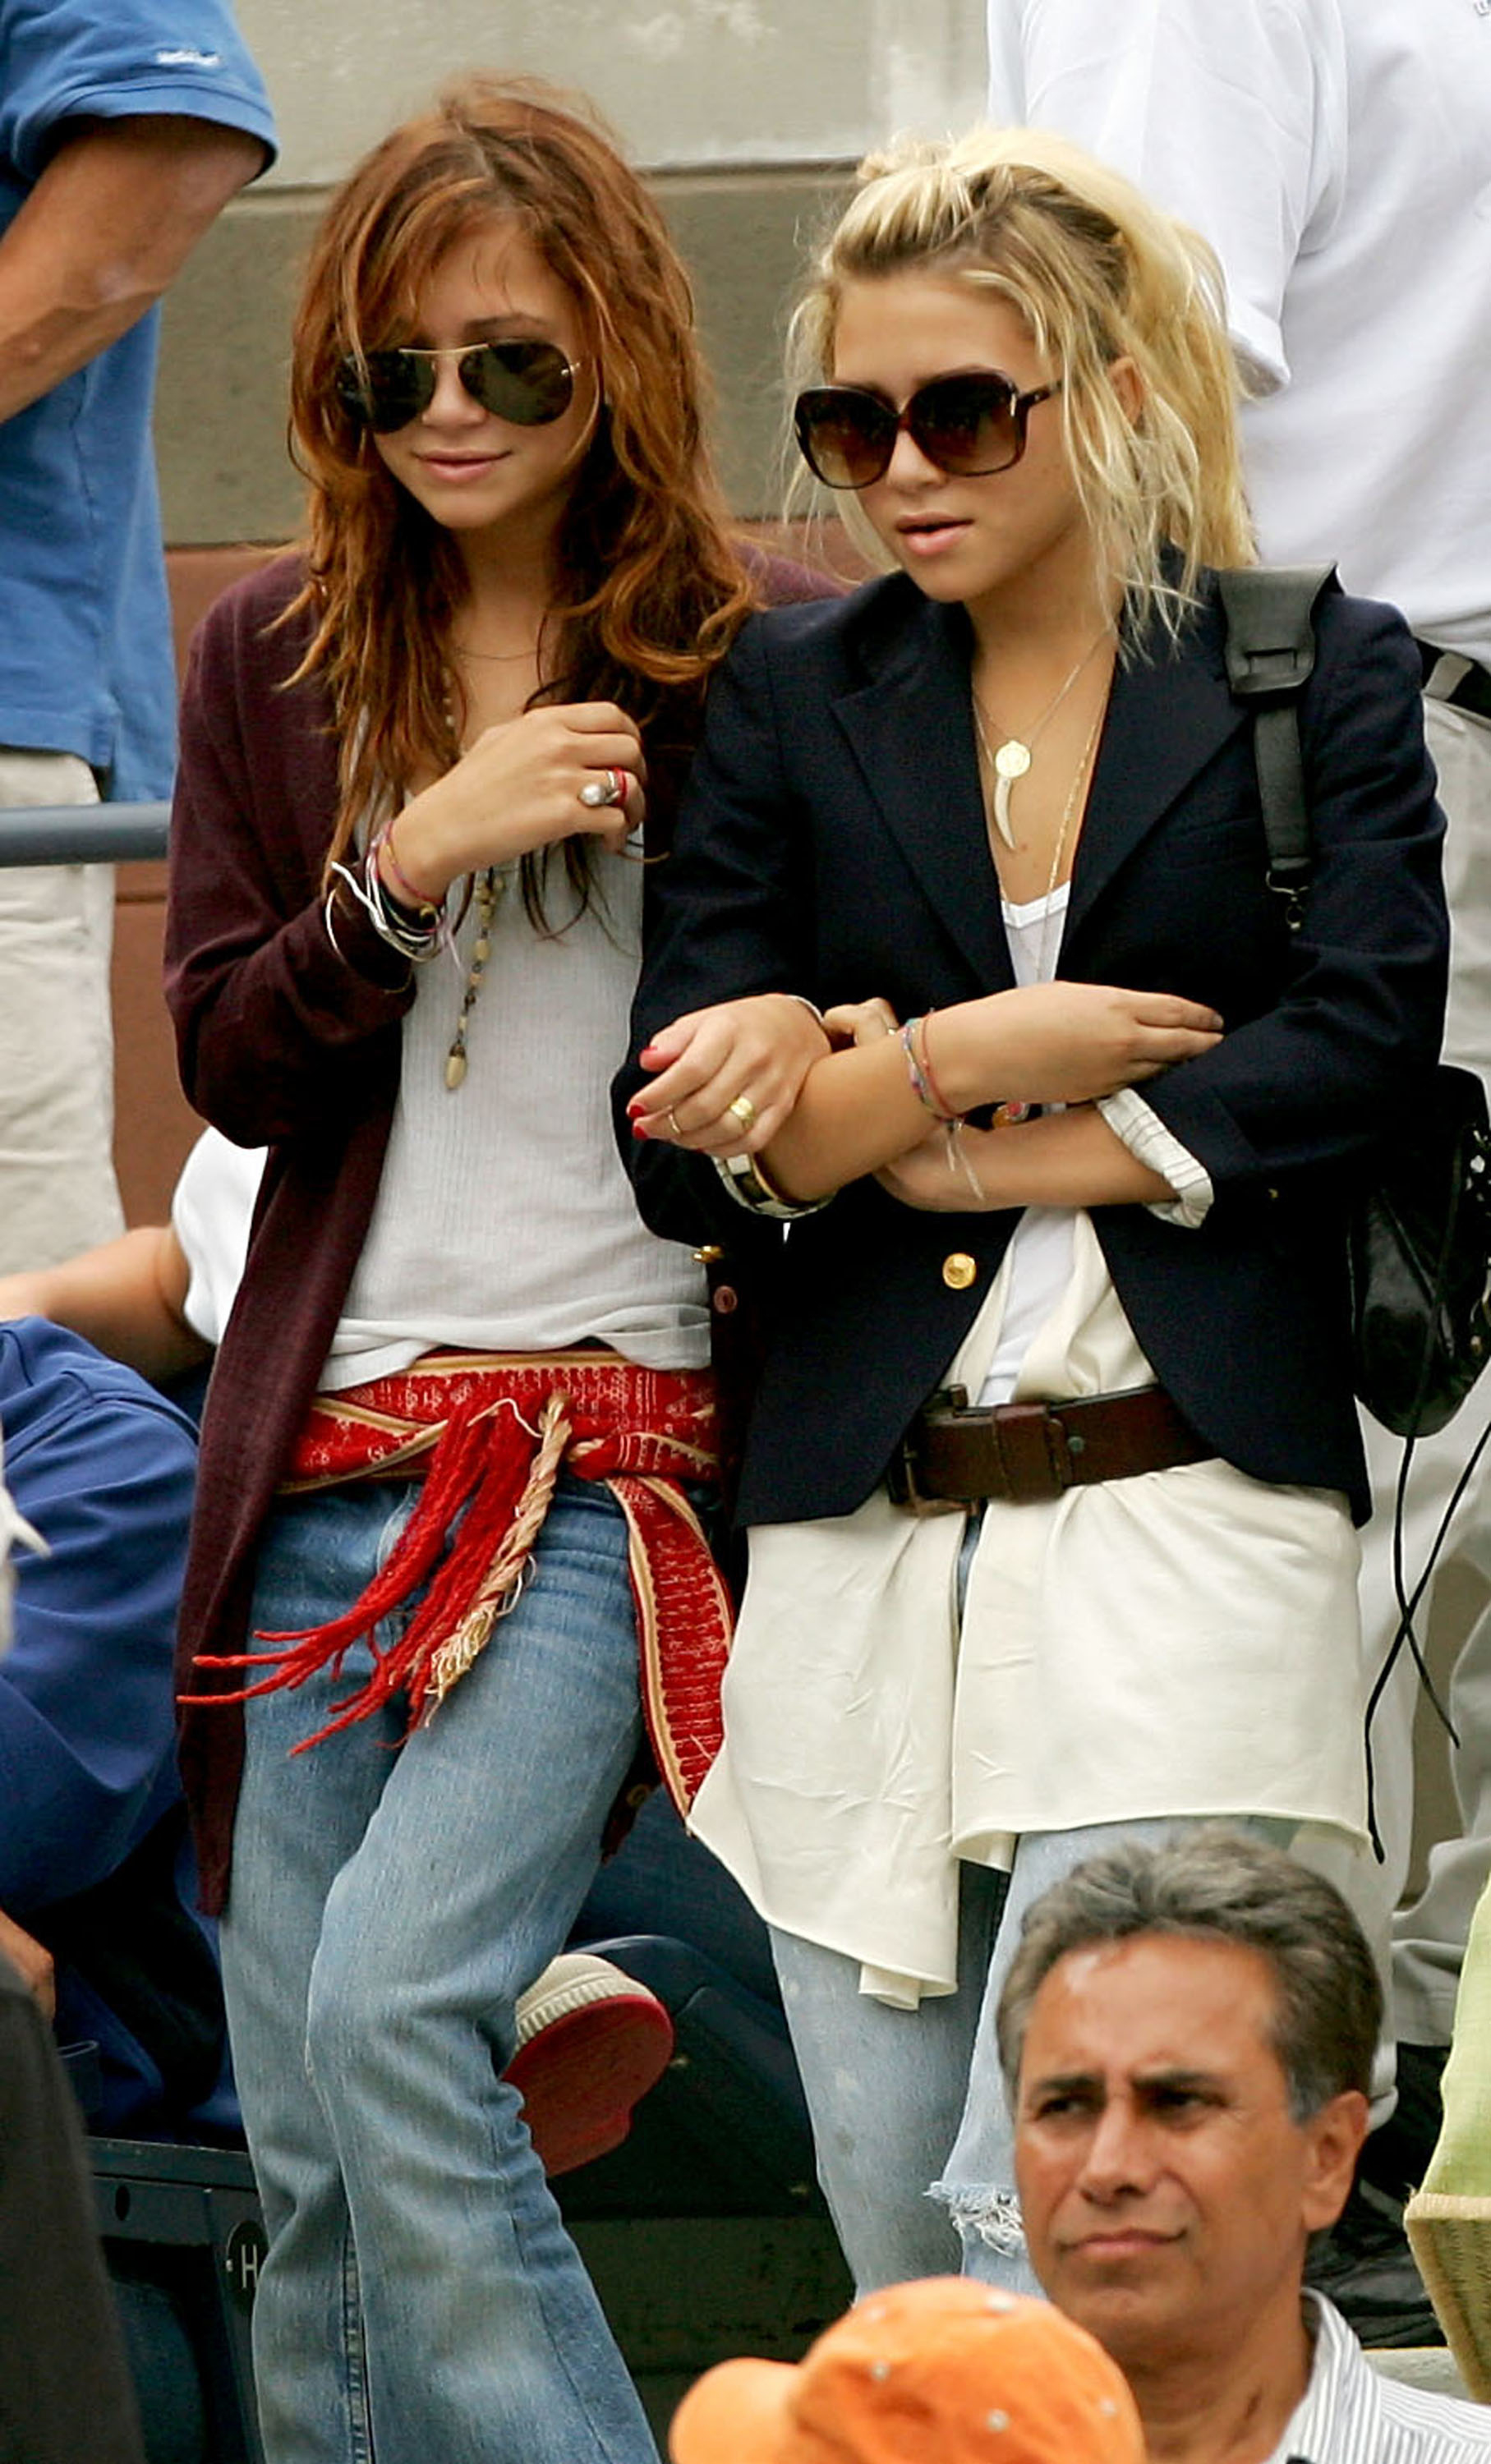 Mary-Kate and Ashley Olsen walking down the steps to their seats; both are wearing sunglasses and jeans